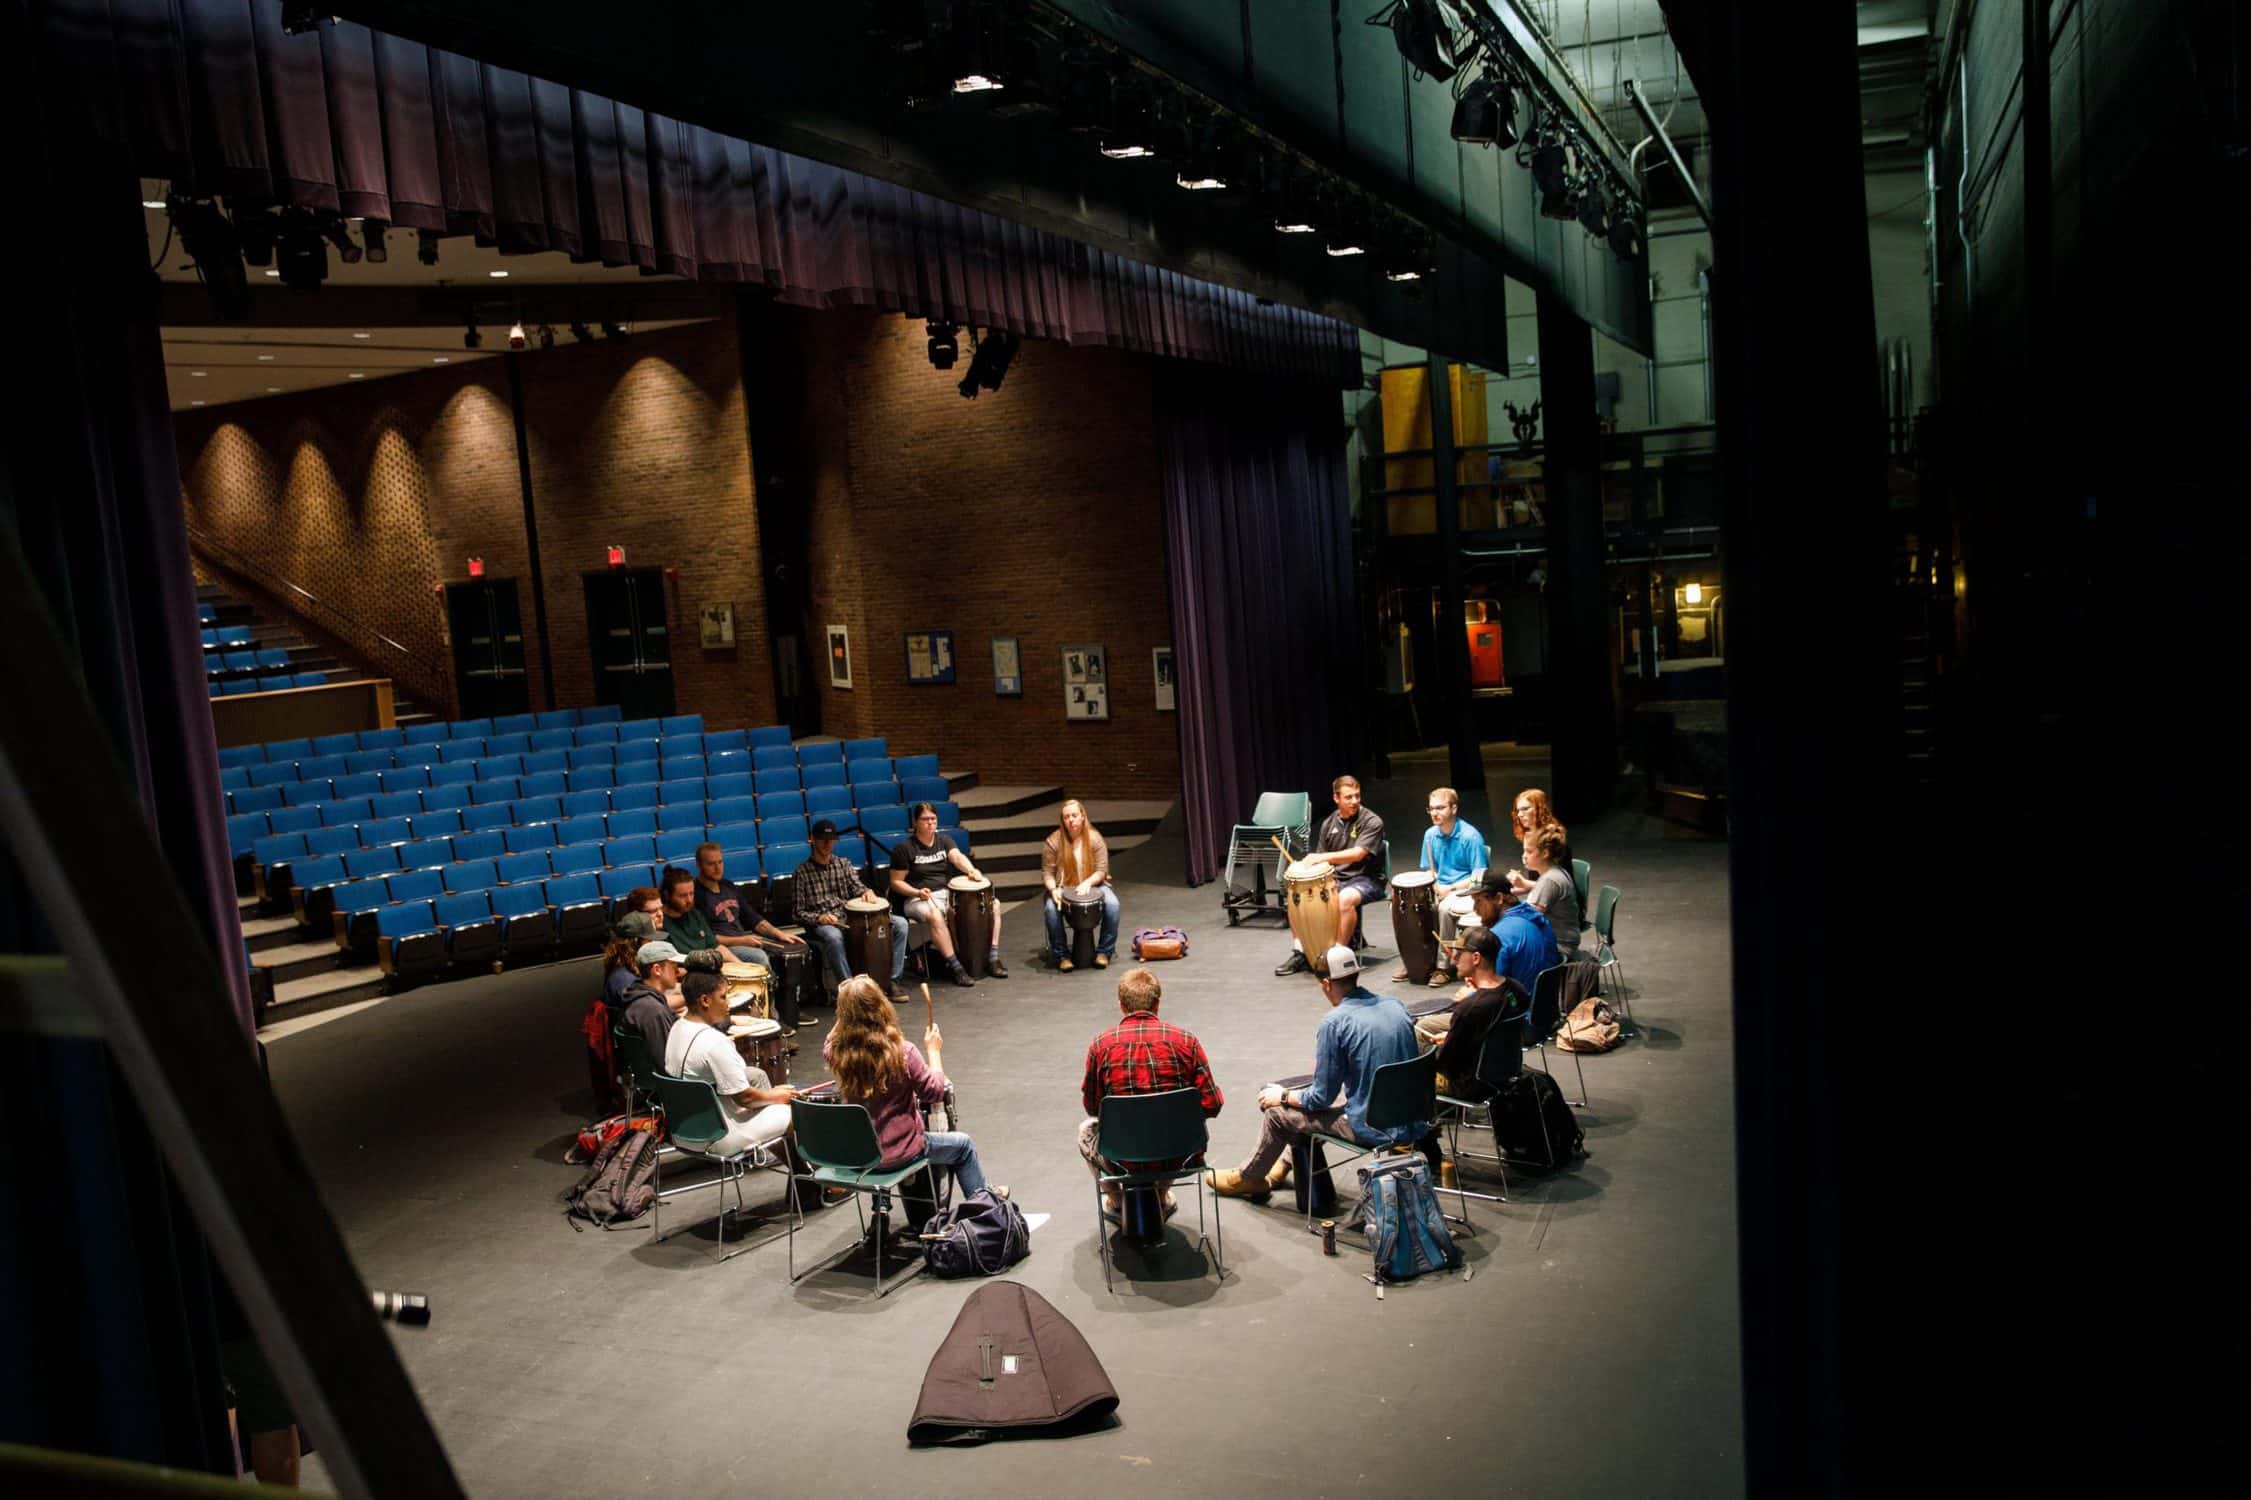 Students sit in a circle with drums